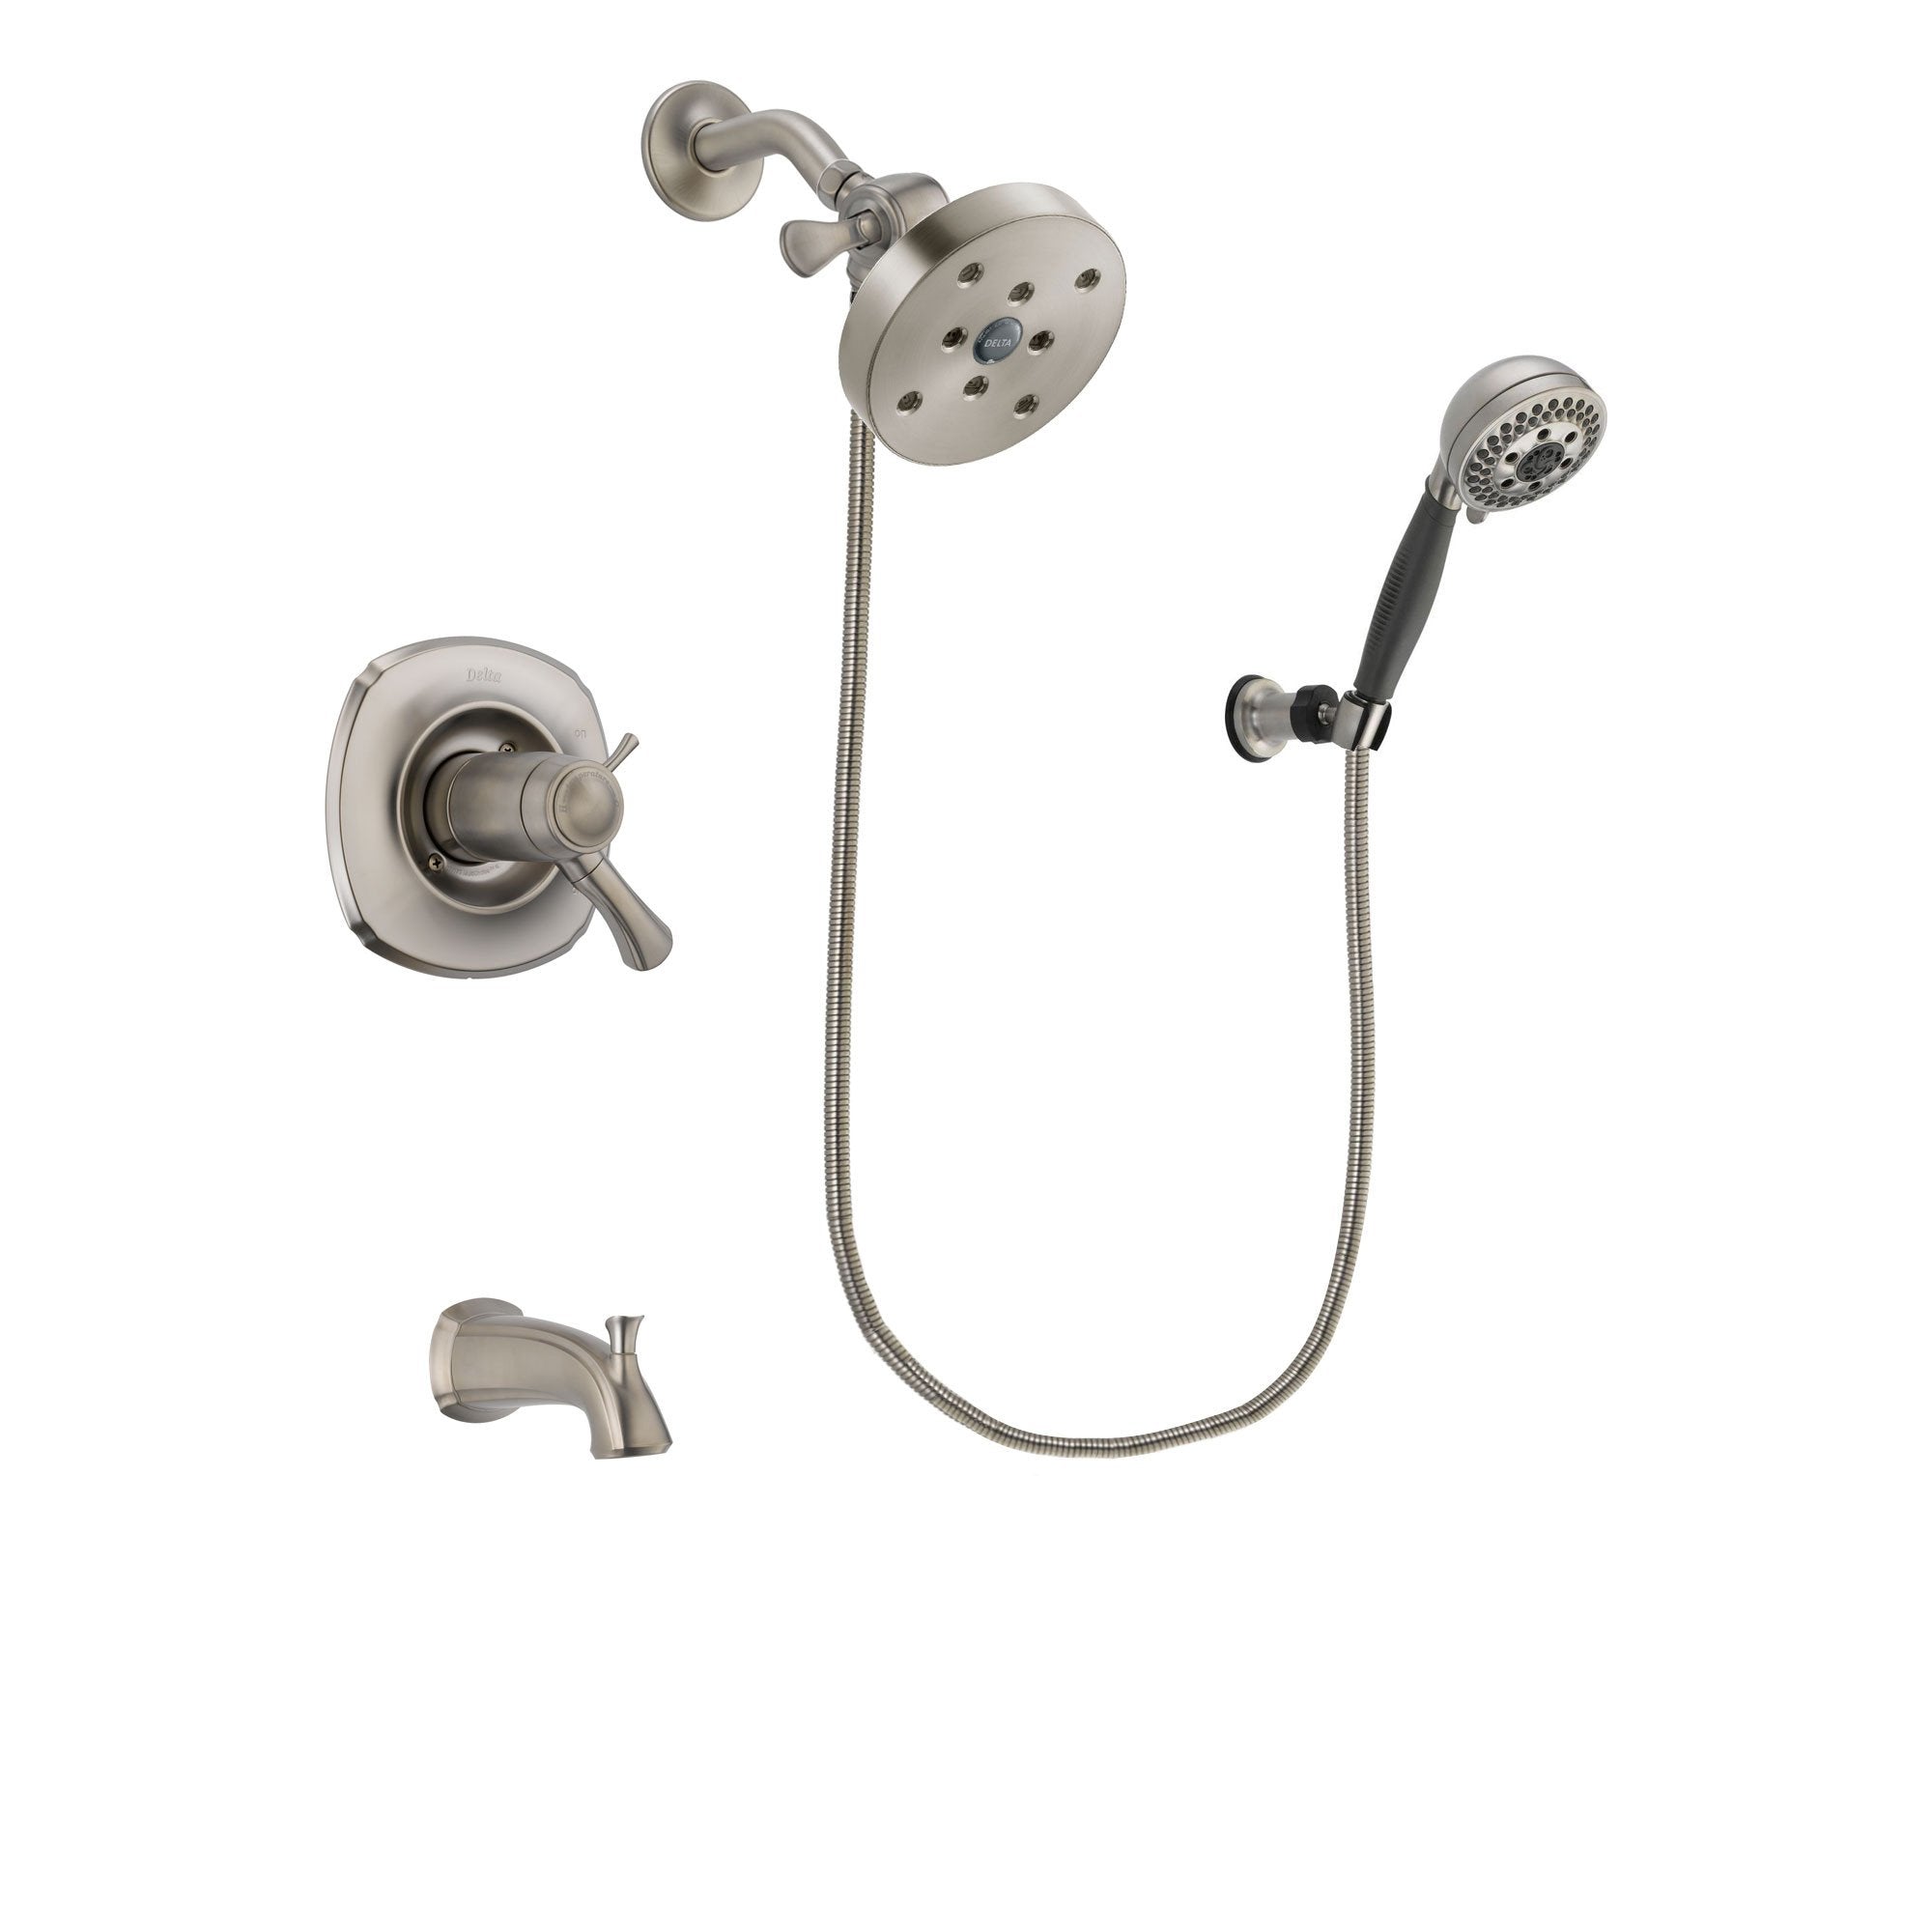 Delta Addison Stainless Steel Finish Thermostatic Tub and Shower Faucet System Package with 5-1/2 inch Shower Head and 5-Setting Wall Mount Personal Handheld Shower Includes Rough-in Valve and Tub Spout DSP2029V